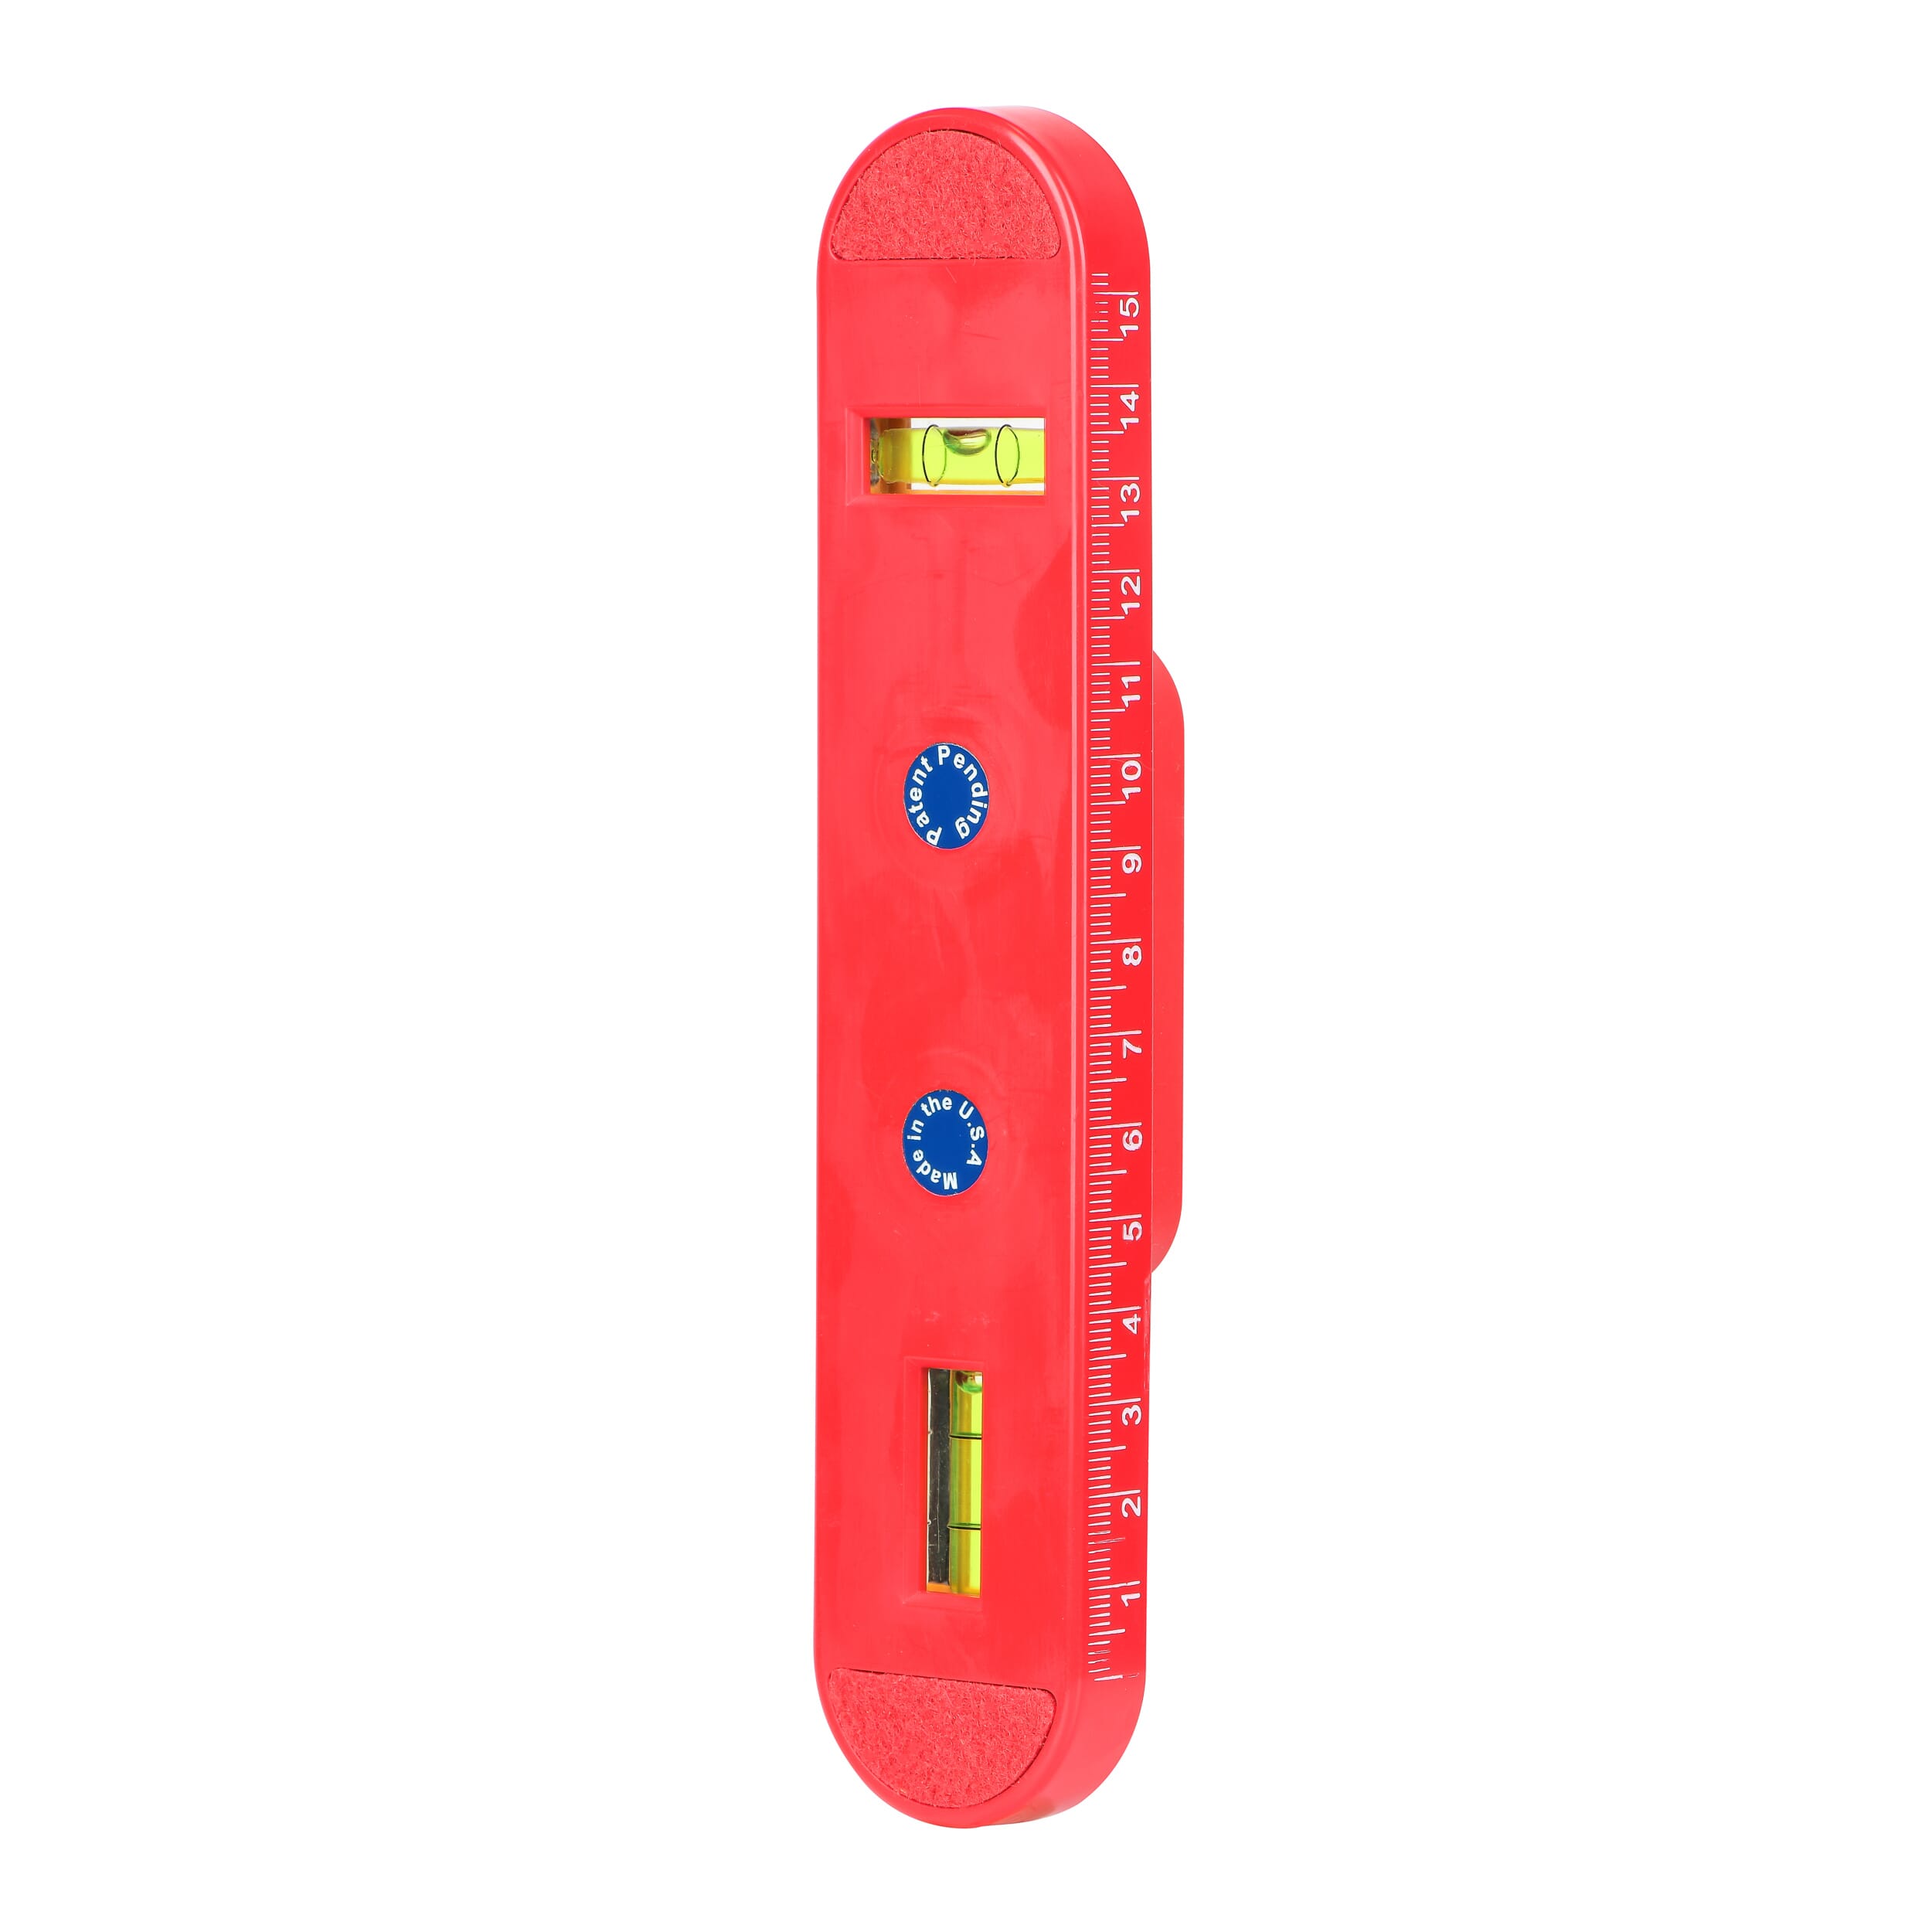 The StudBuddy Plus Magnetic Stud Finder & Spirit Level – Boodle Store